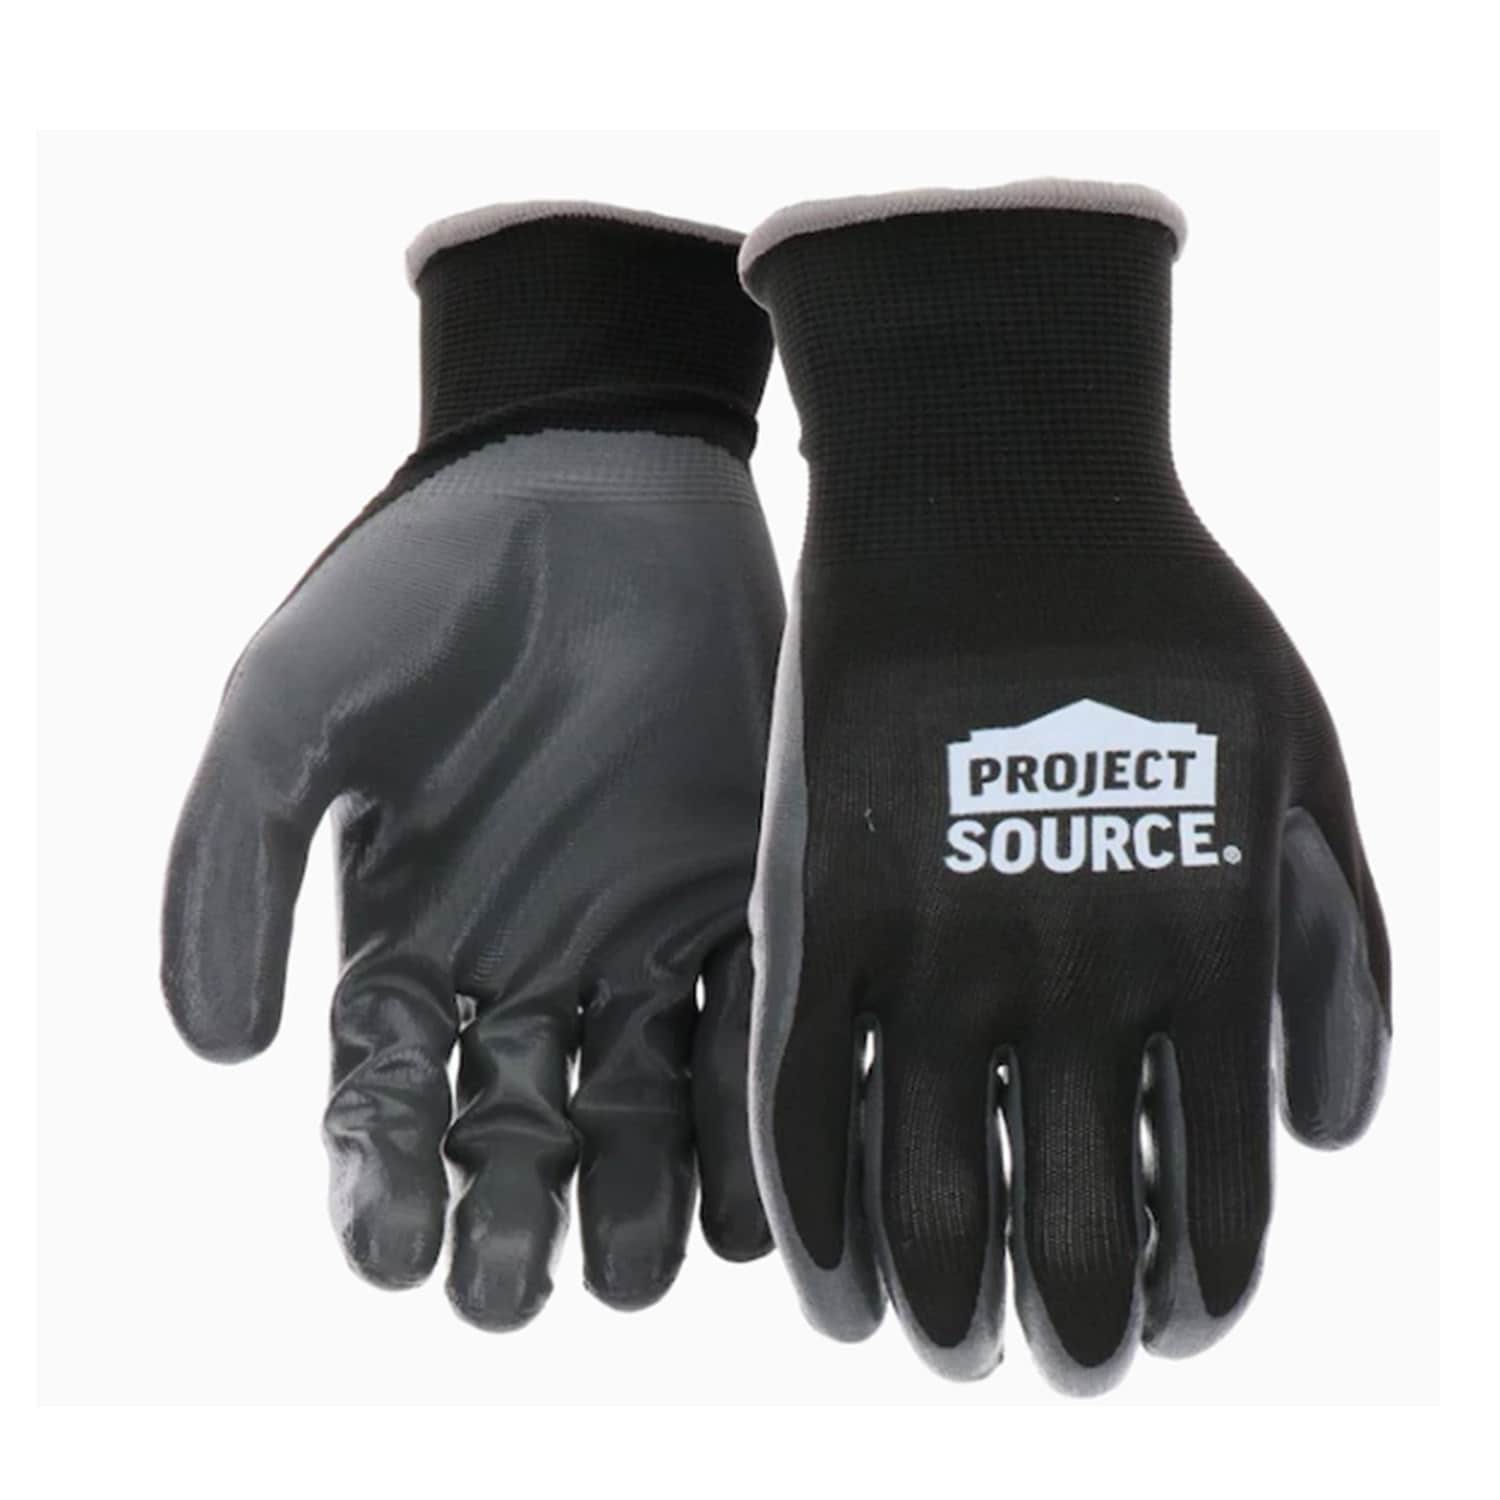 PU Coated Puncture Resistance Gloves with Grip for Moving - China